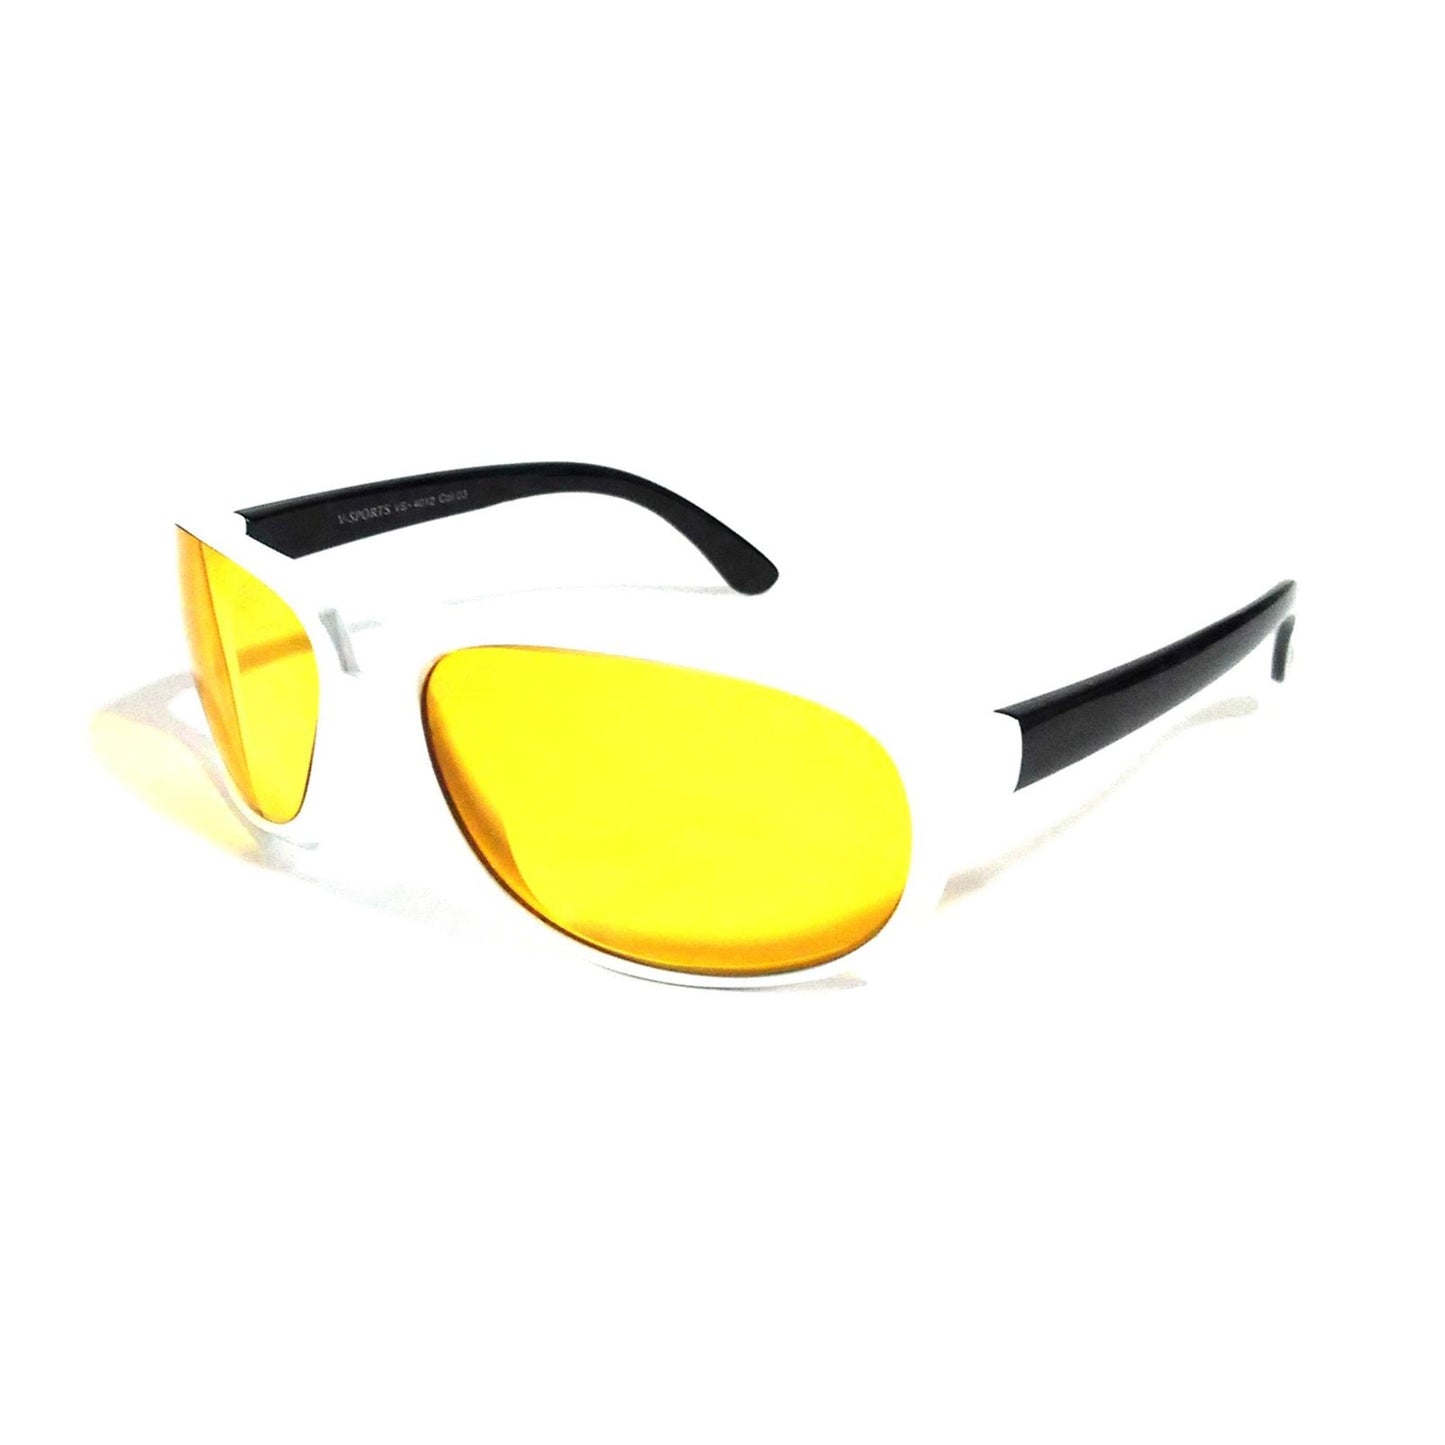 HD Vision Night Driving Glasses with Anti Glare Coating 4012